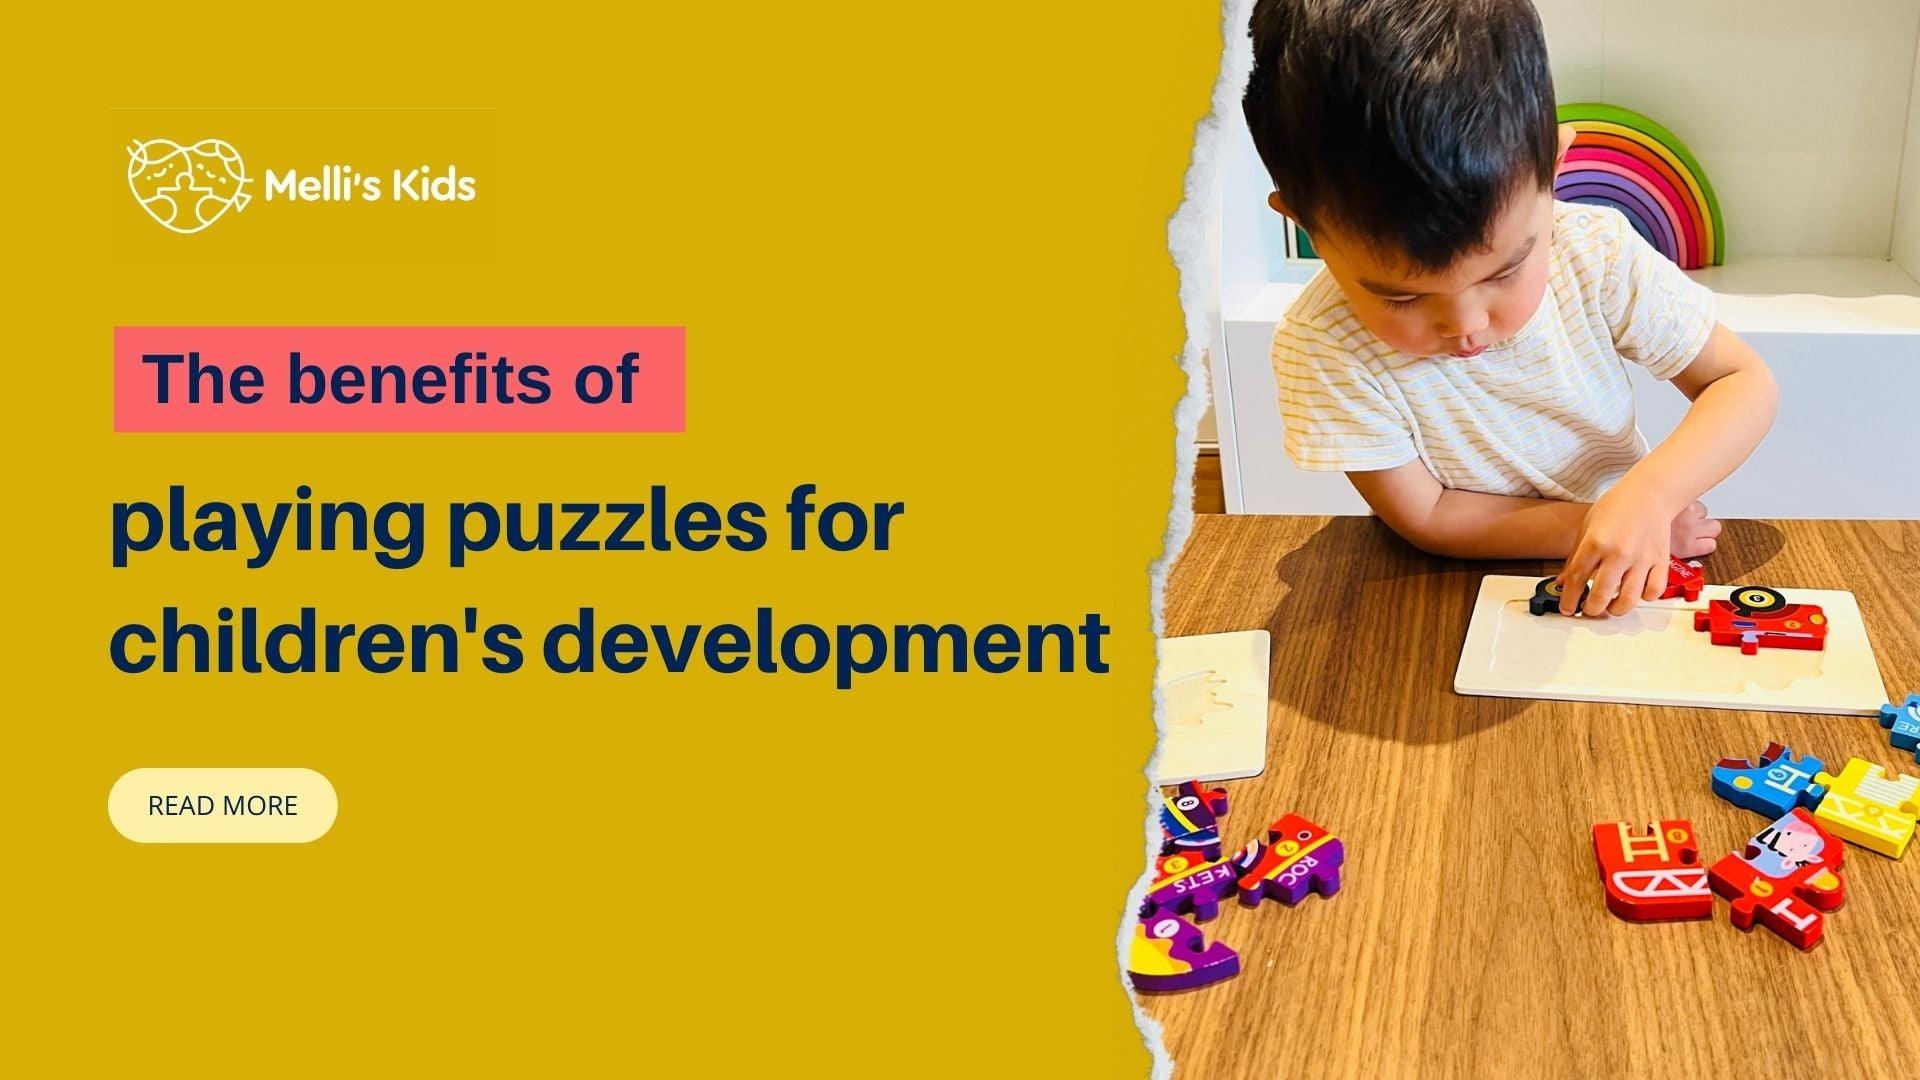 The benefits of playing puzzles for children's development - Melli's Kids